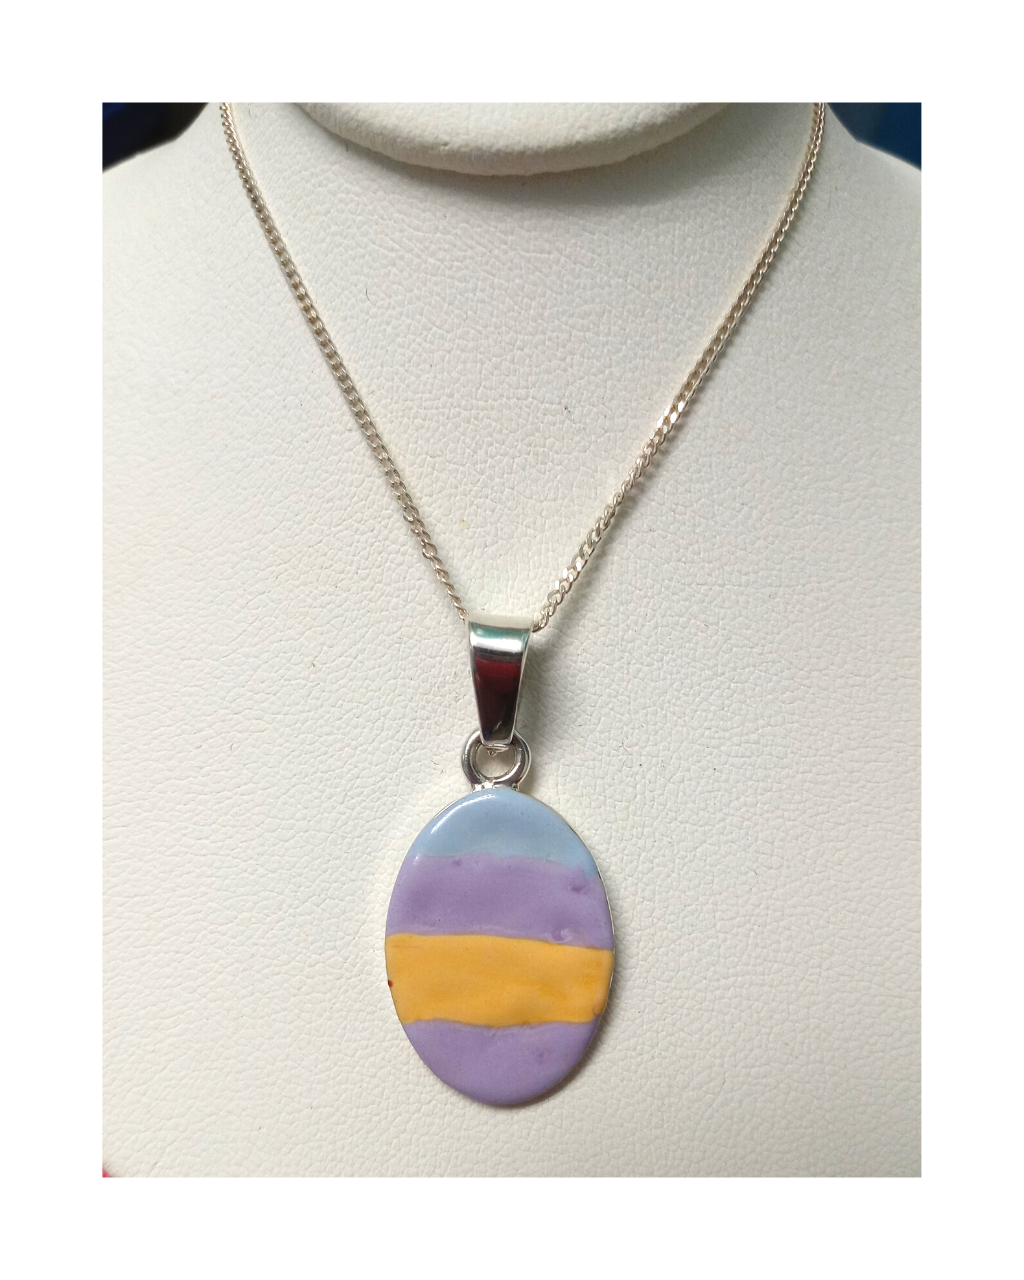 Exclusive Sterling Hand-enameled Wearable Art Oval Easter Egg Design with Polished Back for Engraving Removable Pendant 1 7/16"L X 11/16"W on 16" Curb Chain ONE ONLY